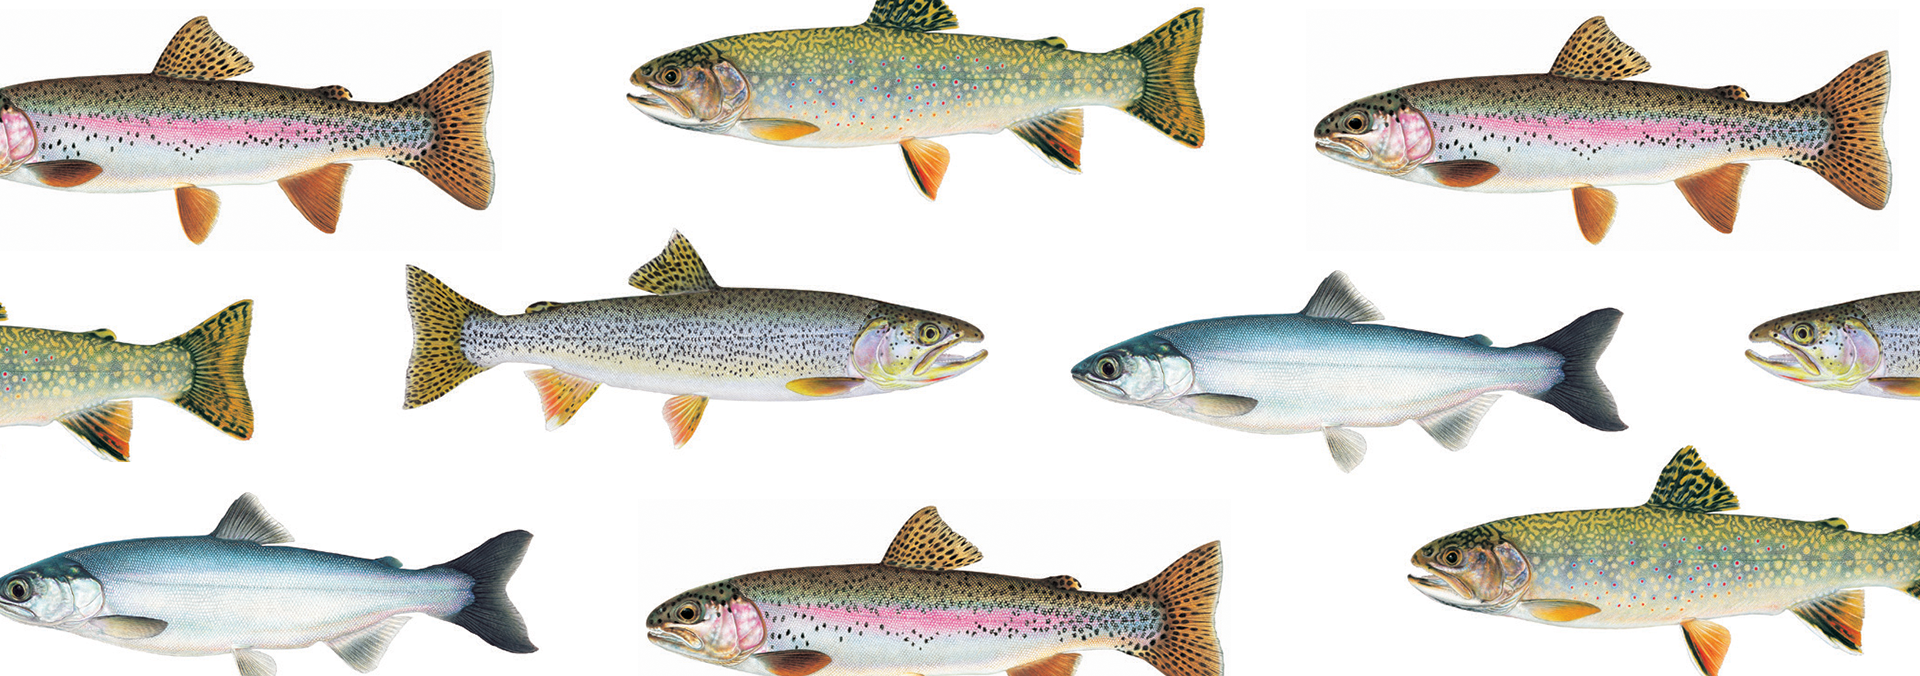 Know Your Fish: B.C. Freshwater Fish Identification